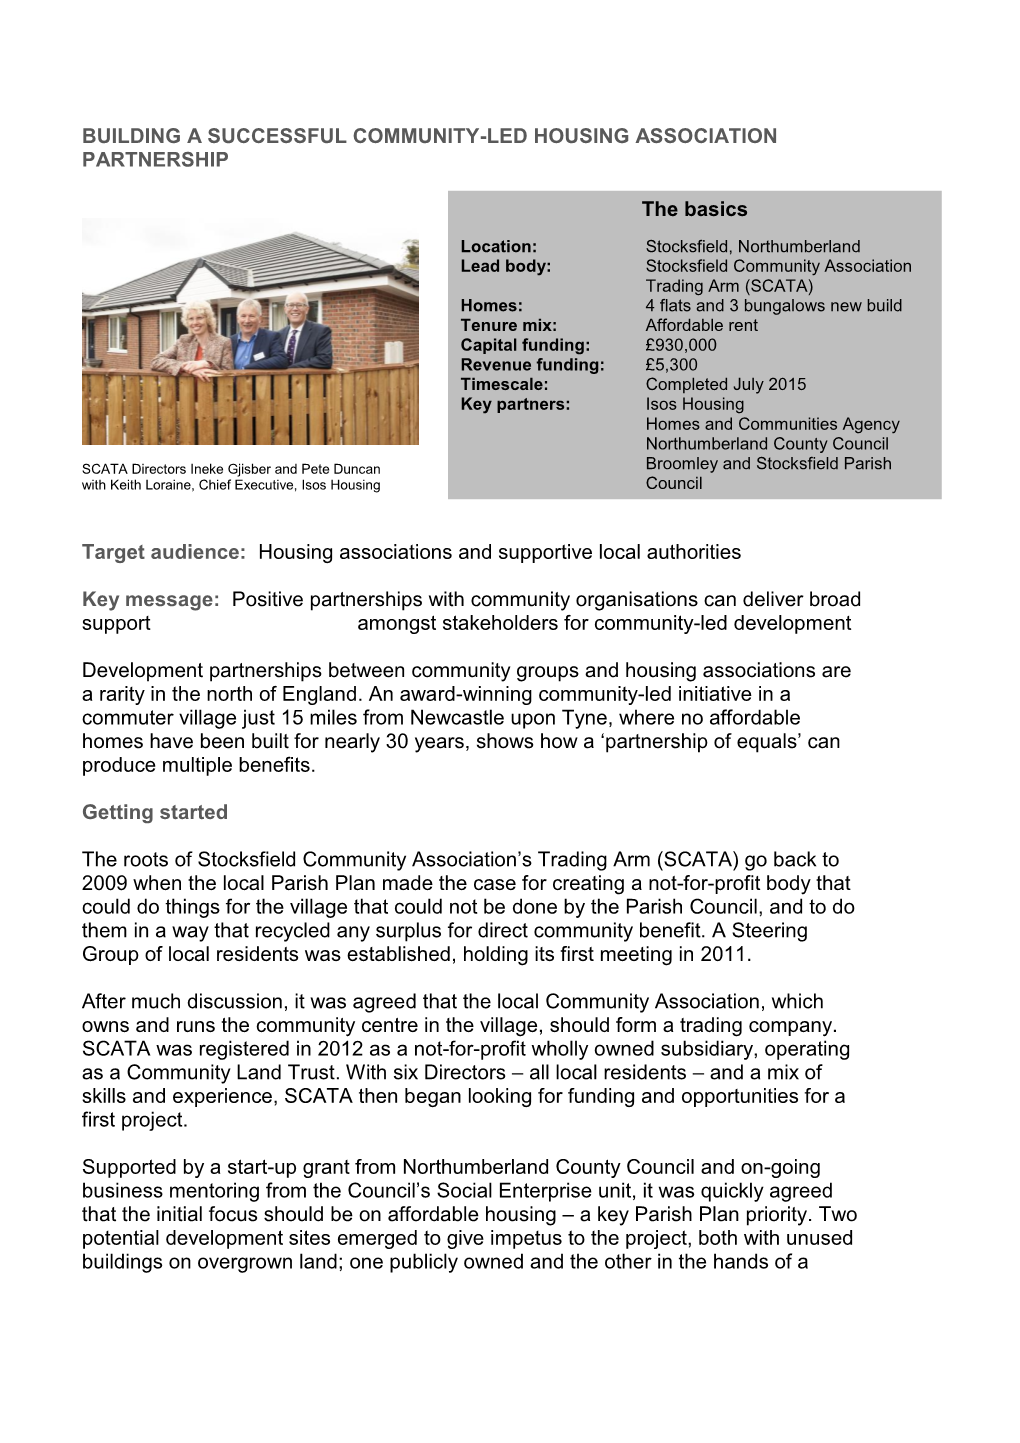 Housing Associations and Supportive Local Authorities